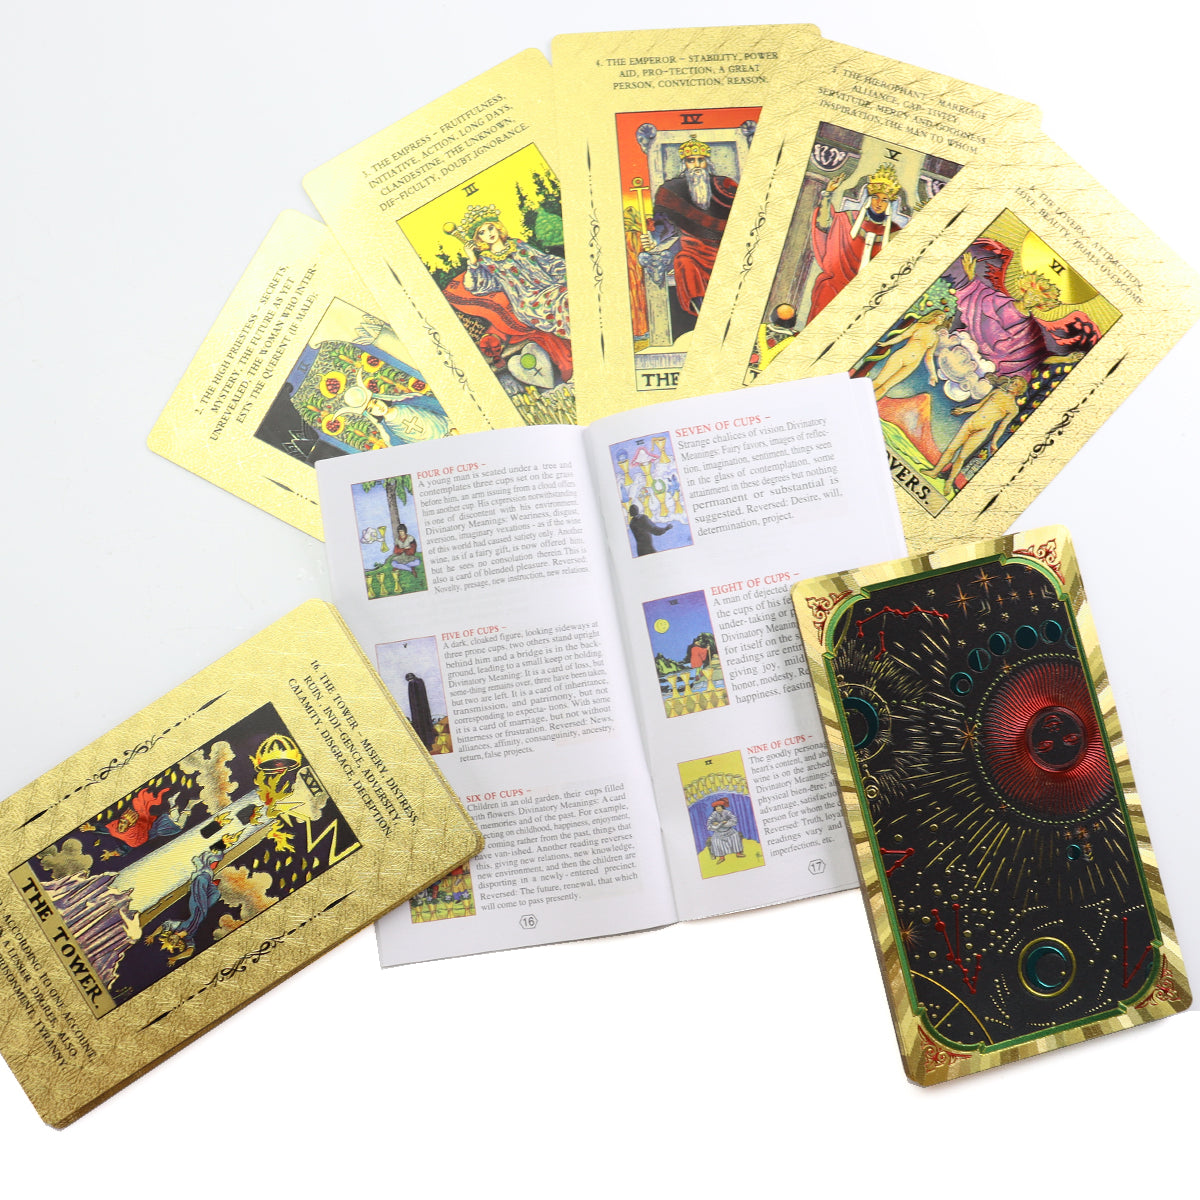 Beginner Tarot Deck With Meaning Keywords In Gold Foil Premium Tear-Resistant Cards | Divination Tarot Card Set With English Guidebook For Newbies | Apollo Tarot Shop